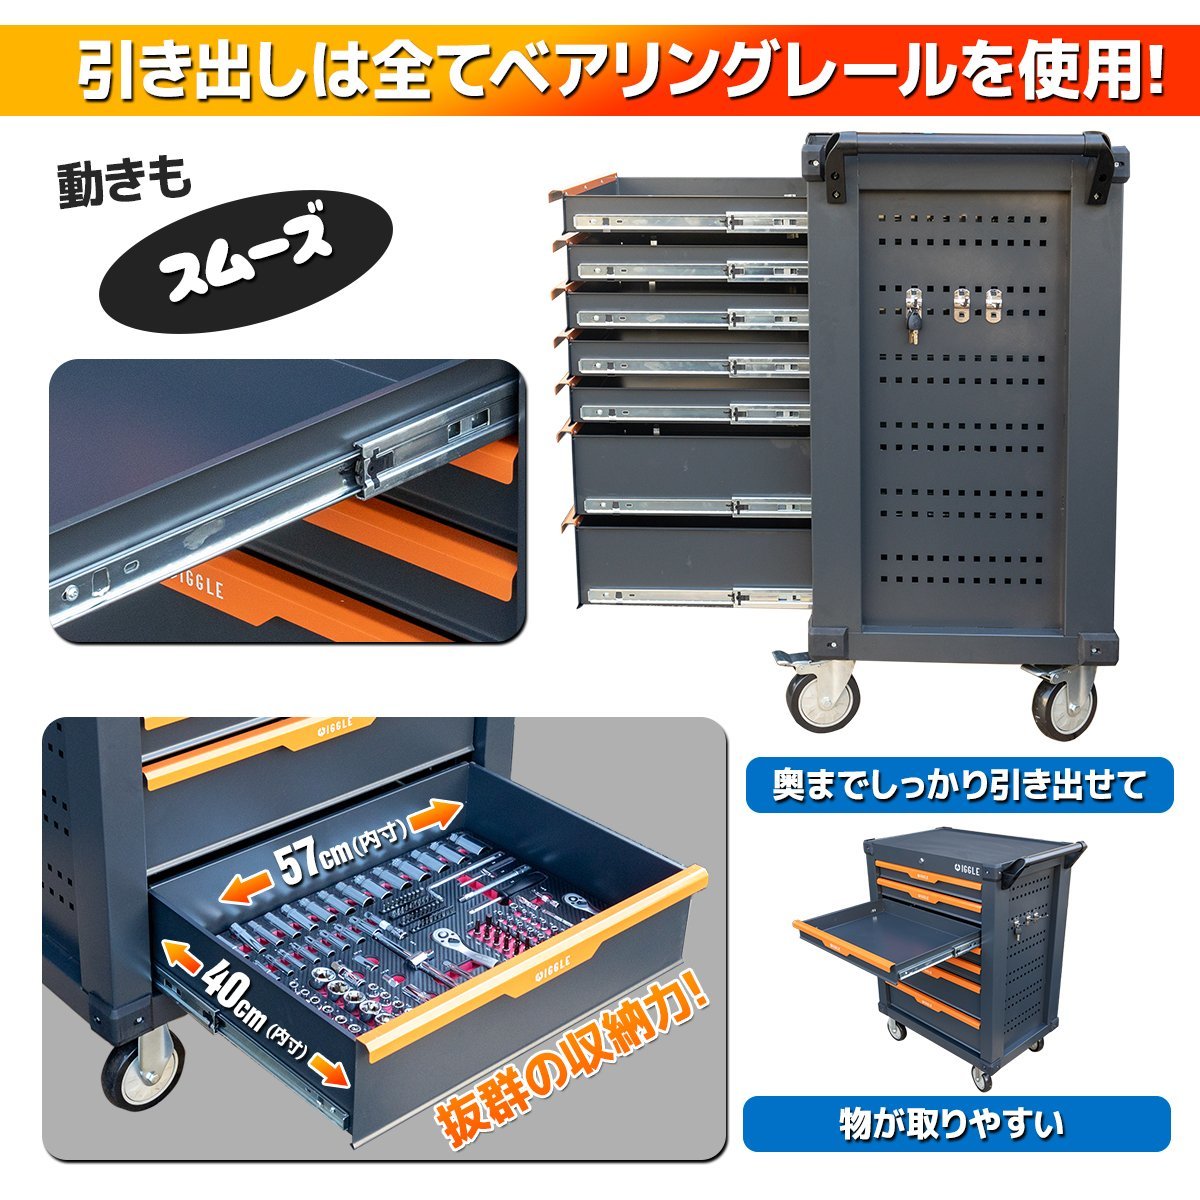  large 7 step roller cabinet tool box tool box tool enough storage / lock key * stopper with casters .[ business shop cease ]